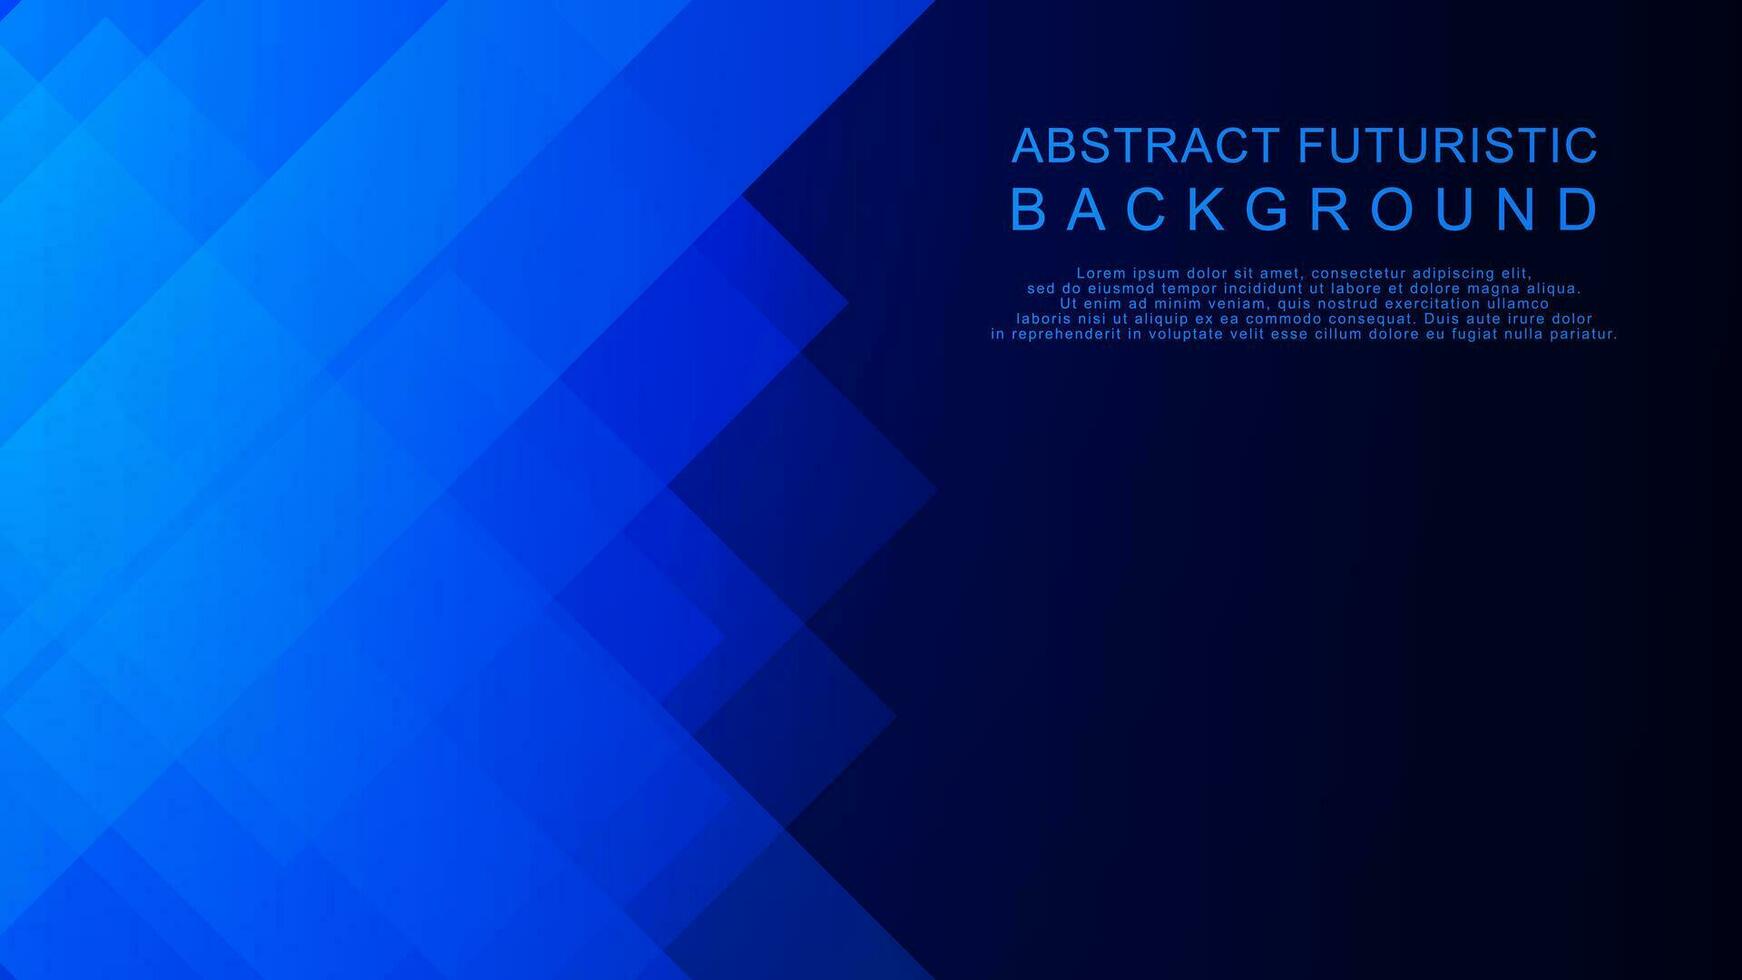 Abstract futuristic with simple shape on dark blue technology background design. Vector illustration.